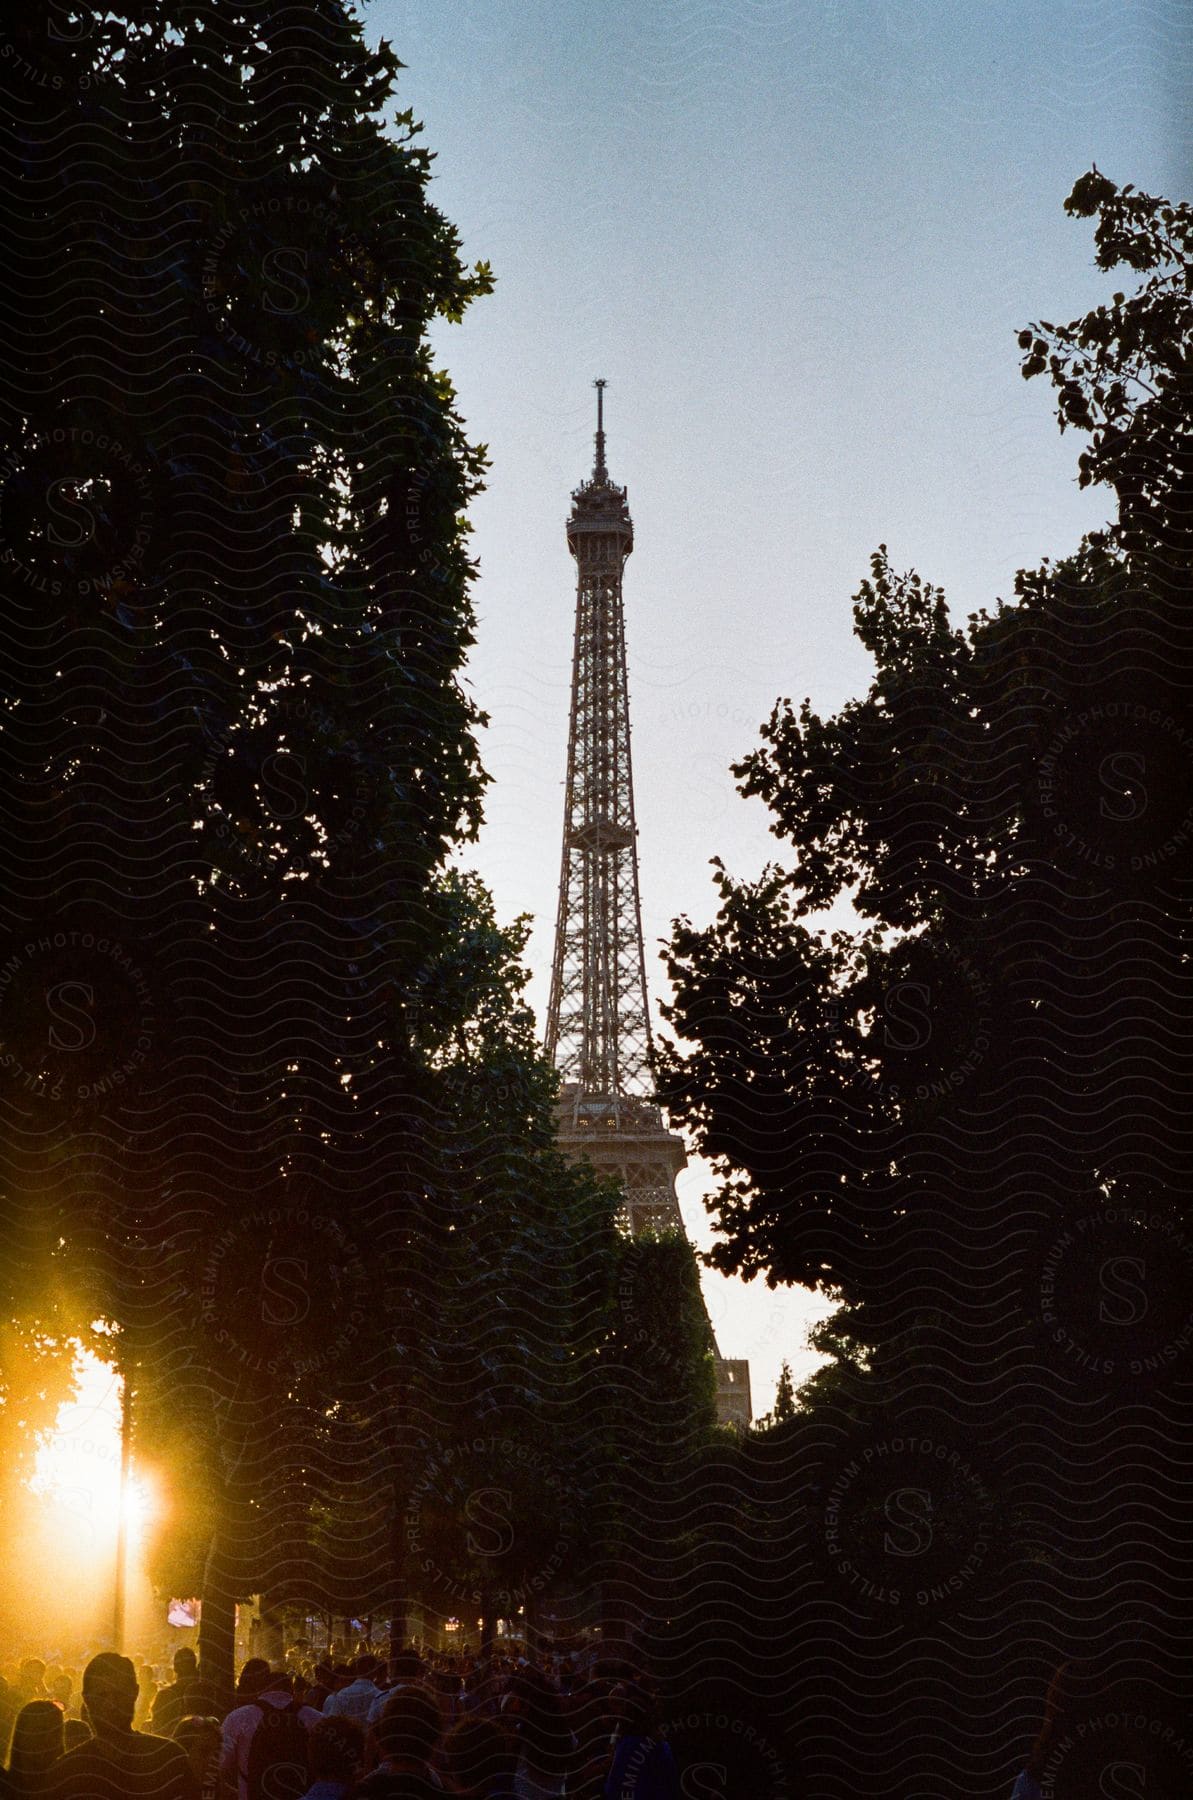 Sunlight breaks through the trees during sunset in a crowded park with the eiffel tower in the background